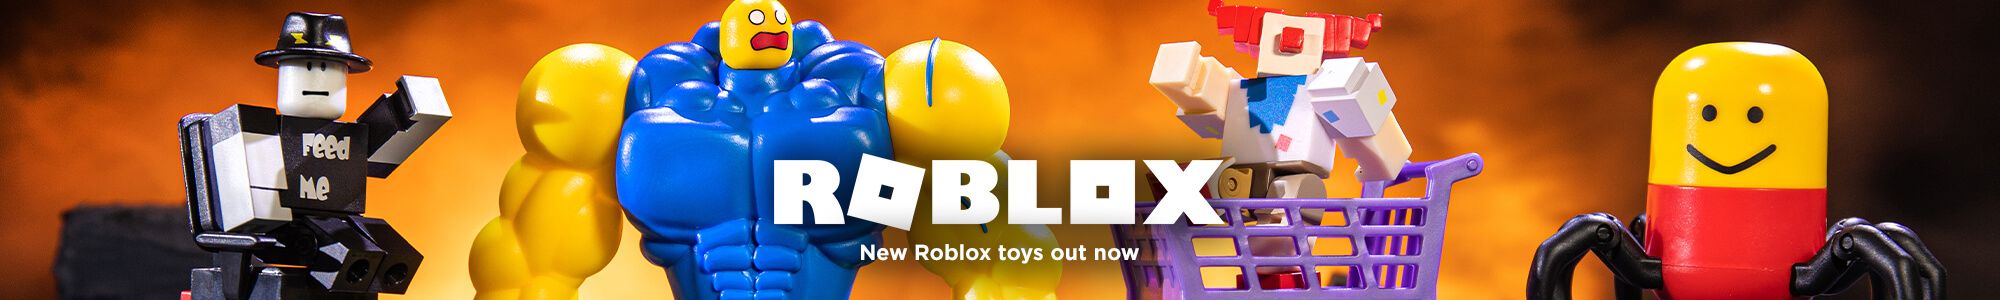 Duel Truck Roblox - roblox game user generated content wikia blog roblox apocalypse